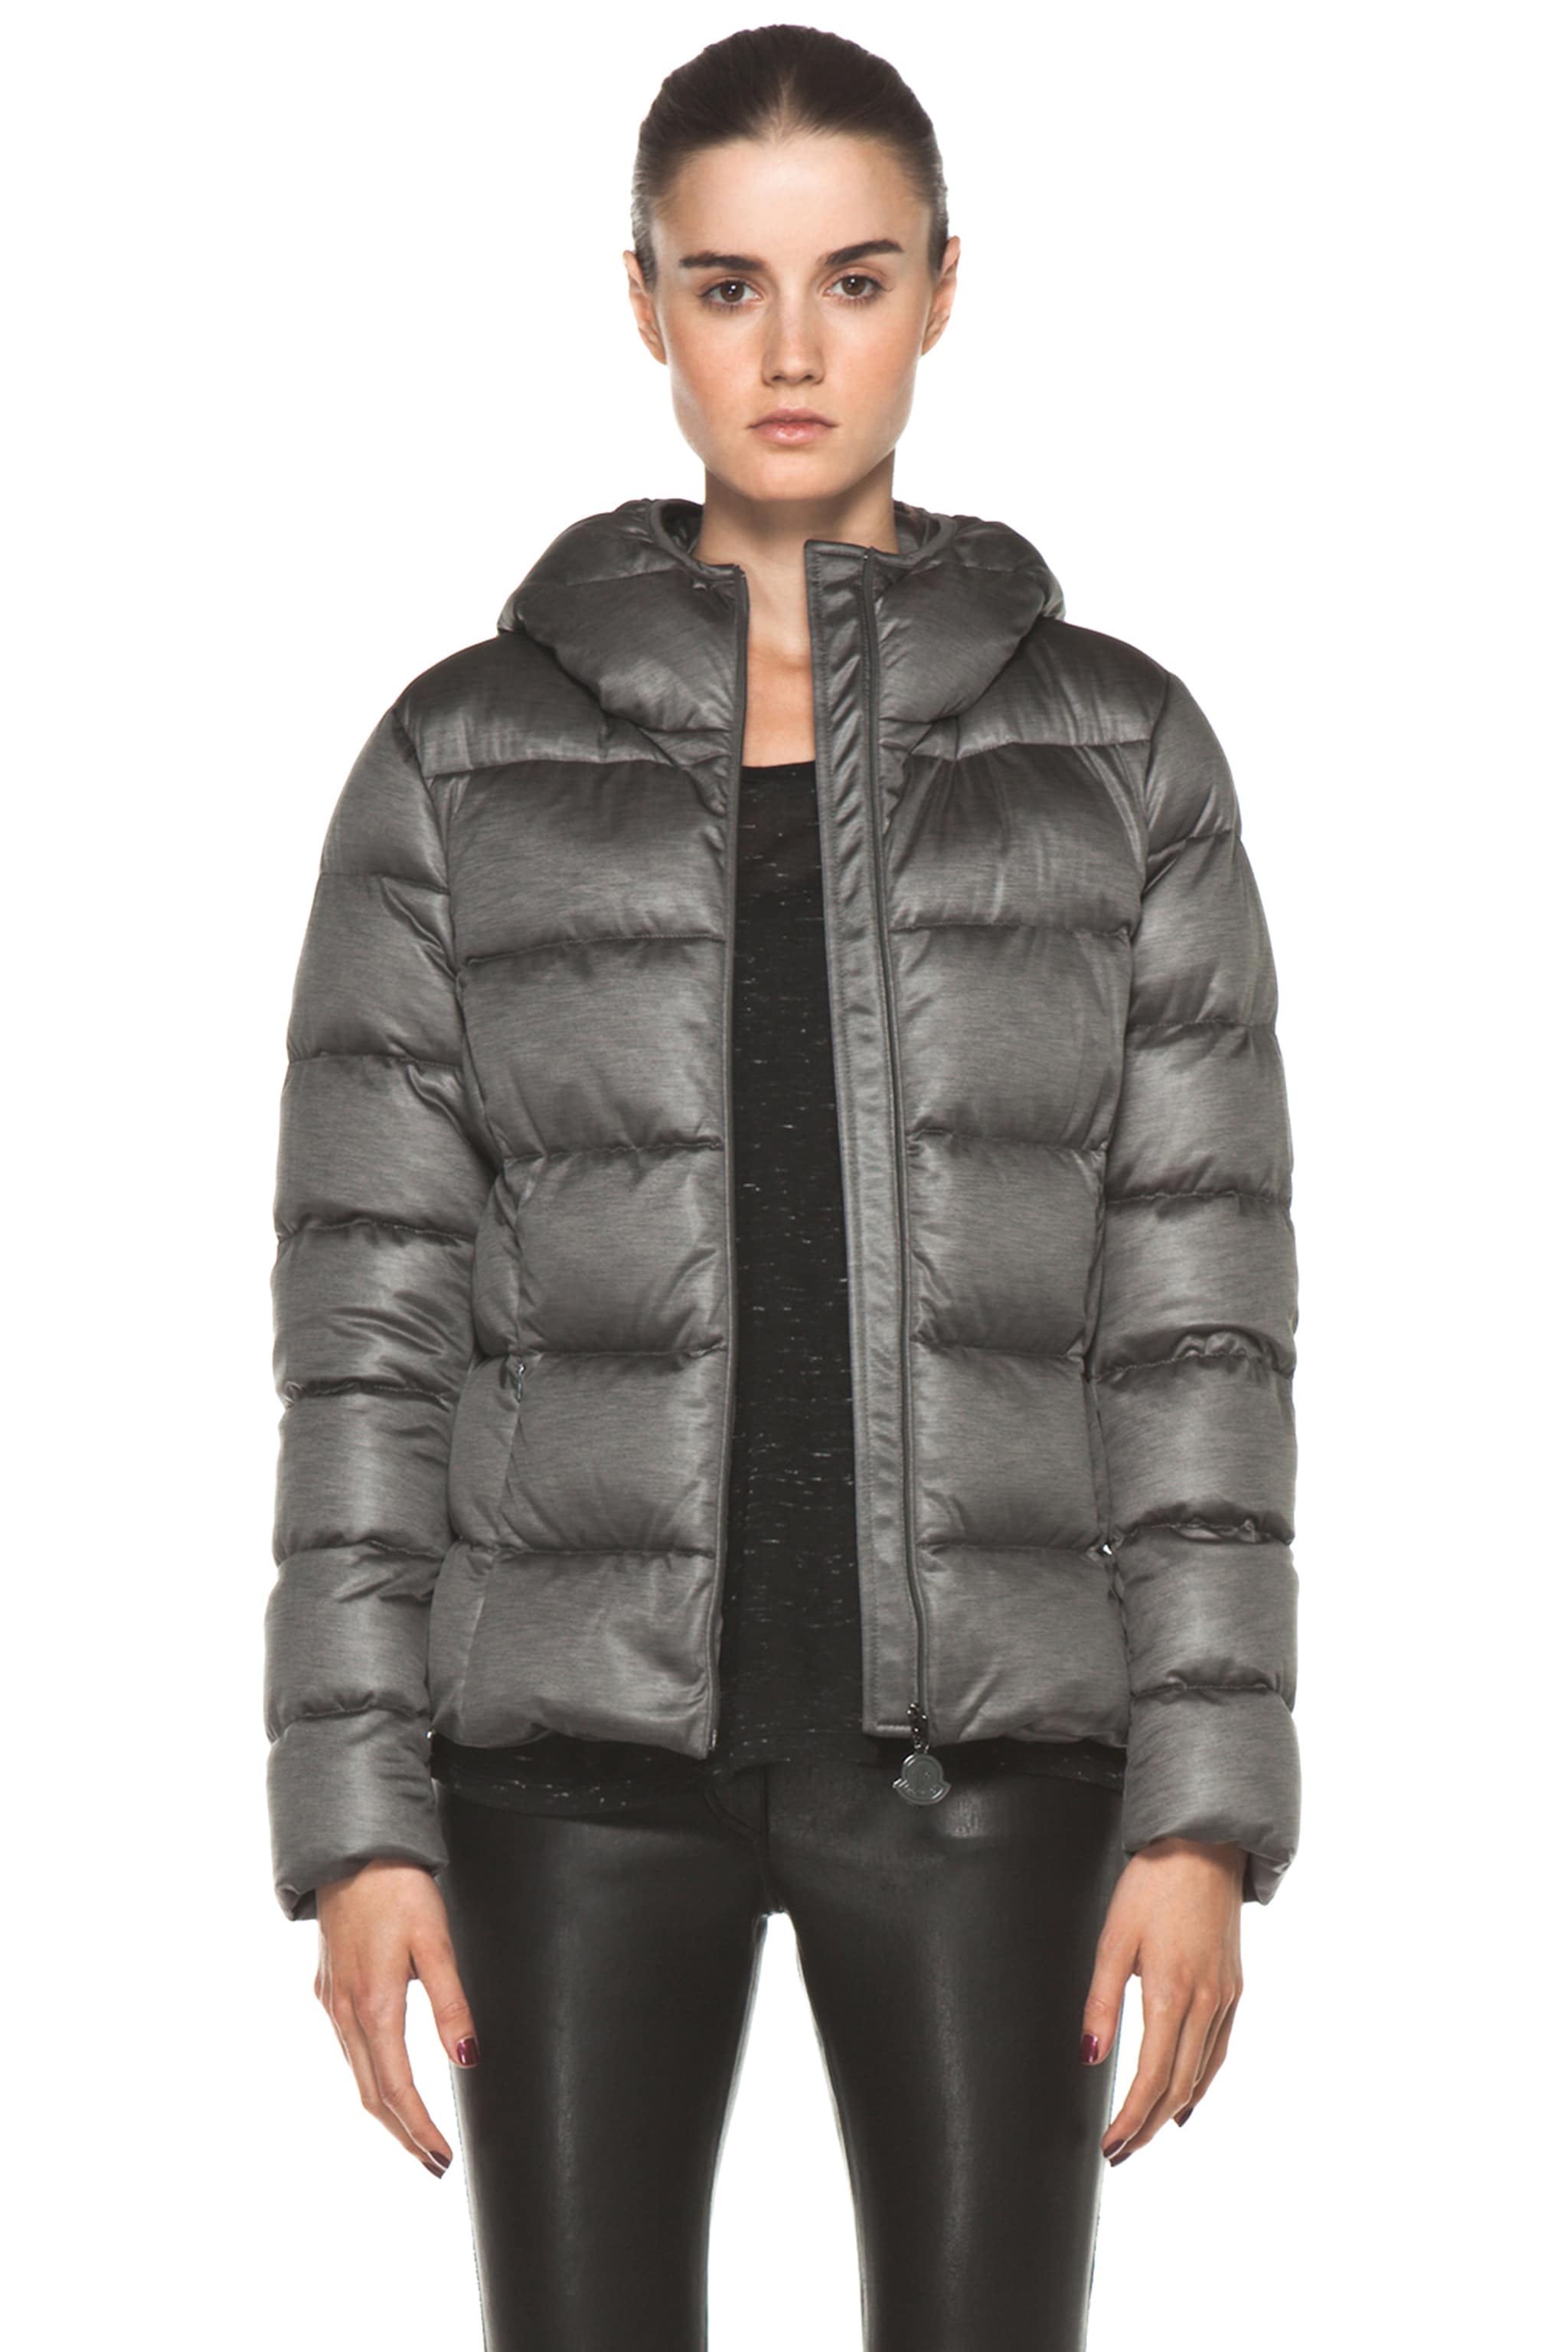 Moncler Jersey Poly Jacket in Charcoal | FWRD